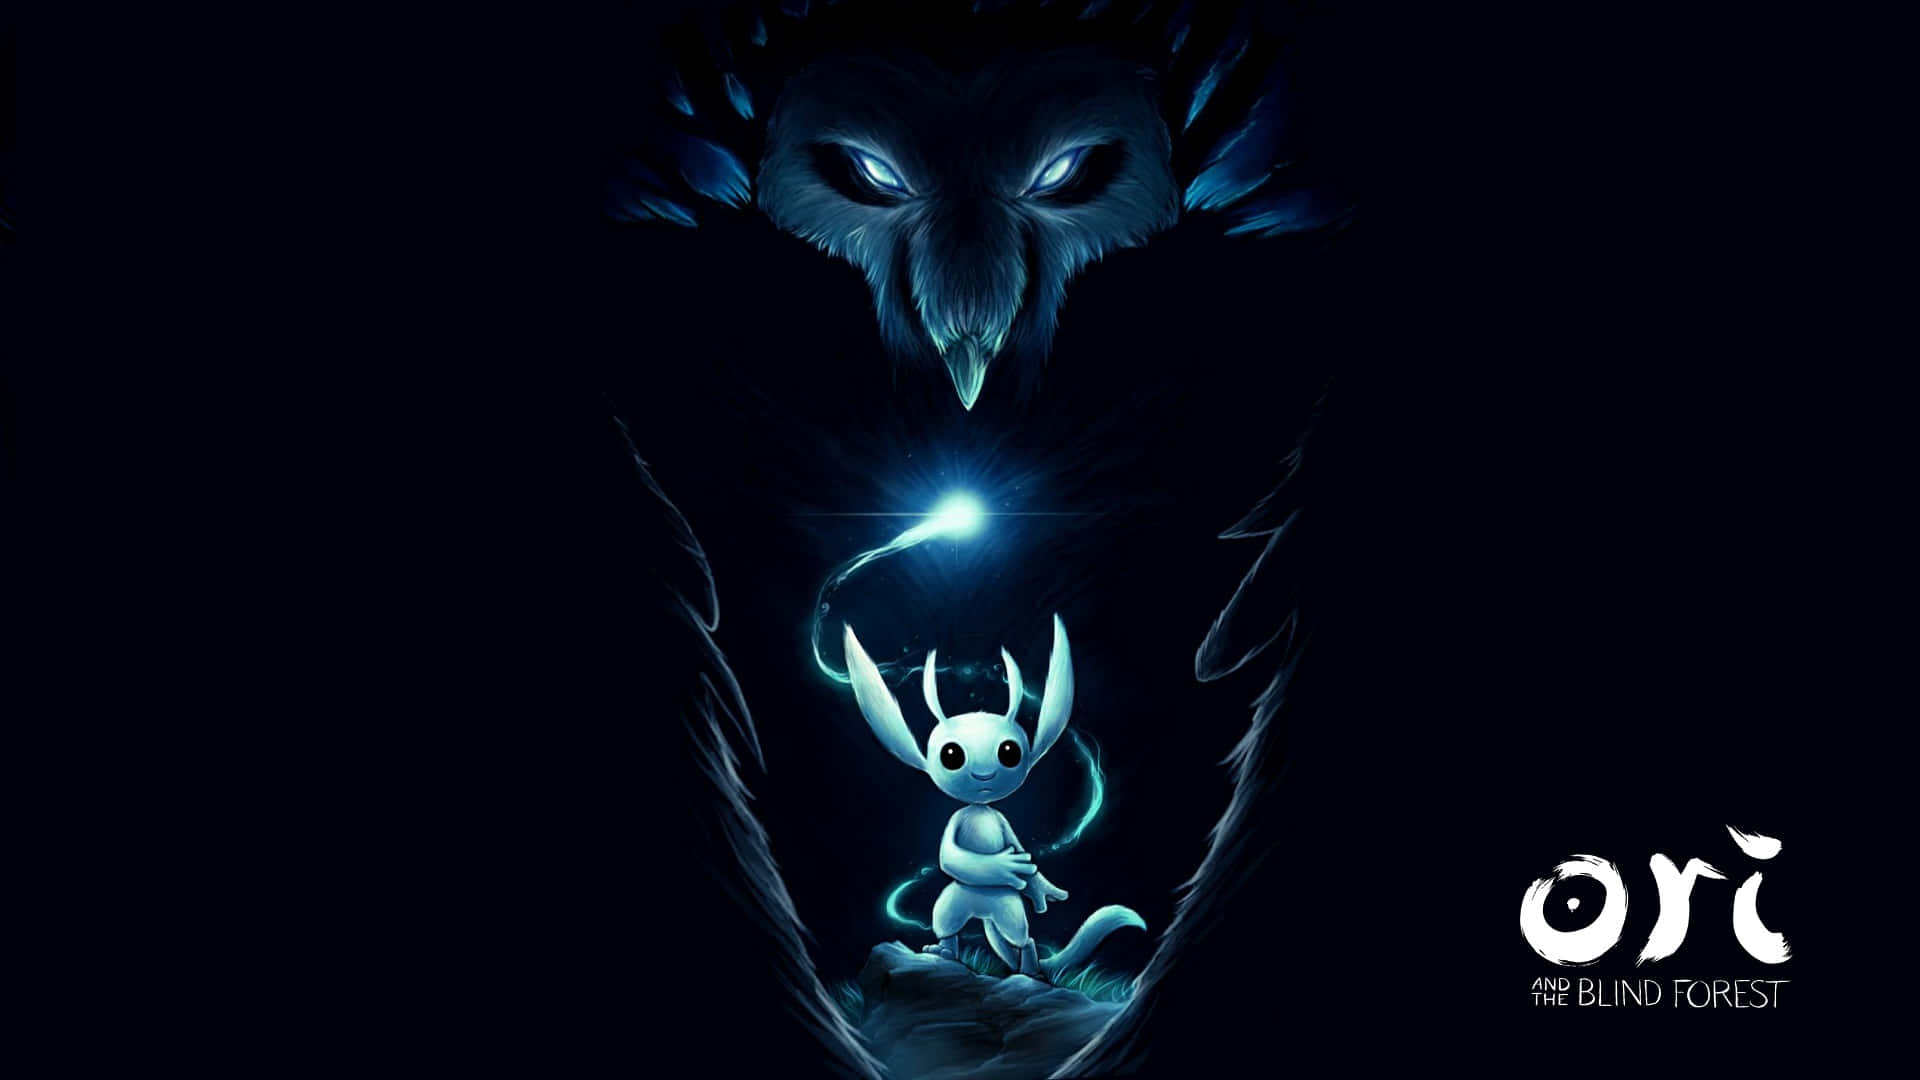 Kuro And Ori In The Blind Forest